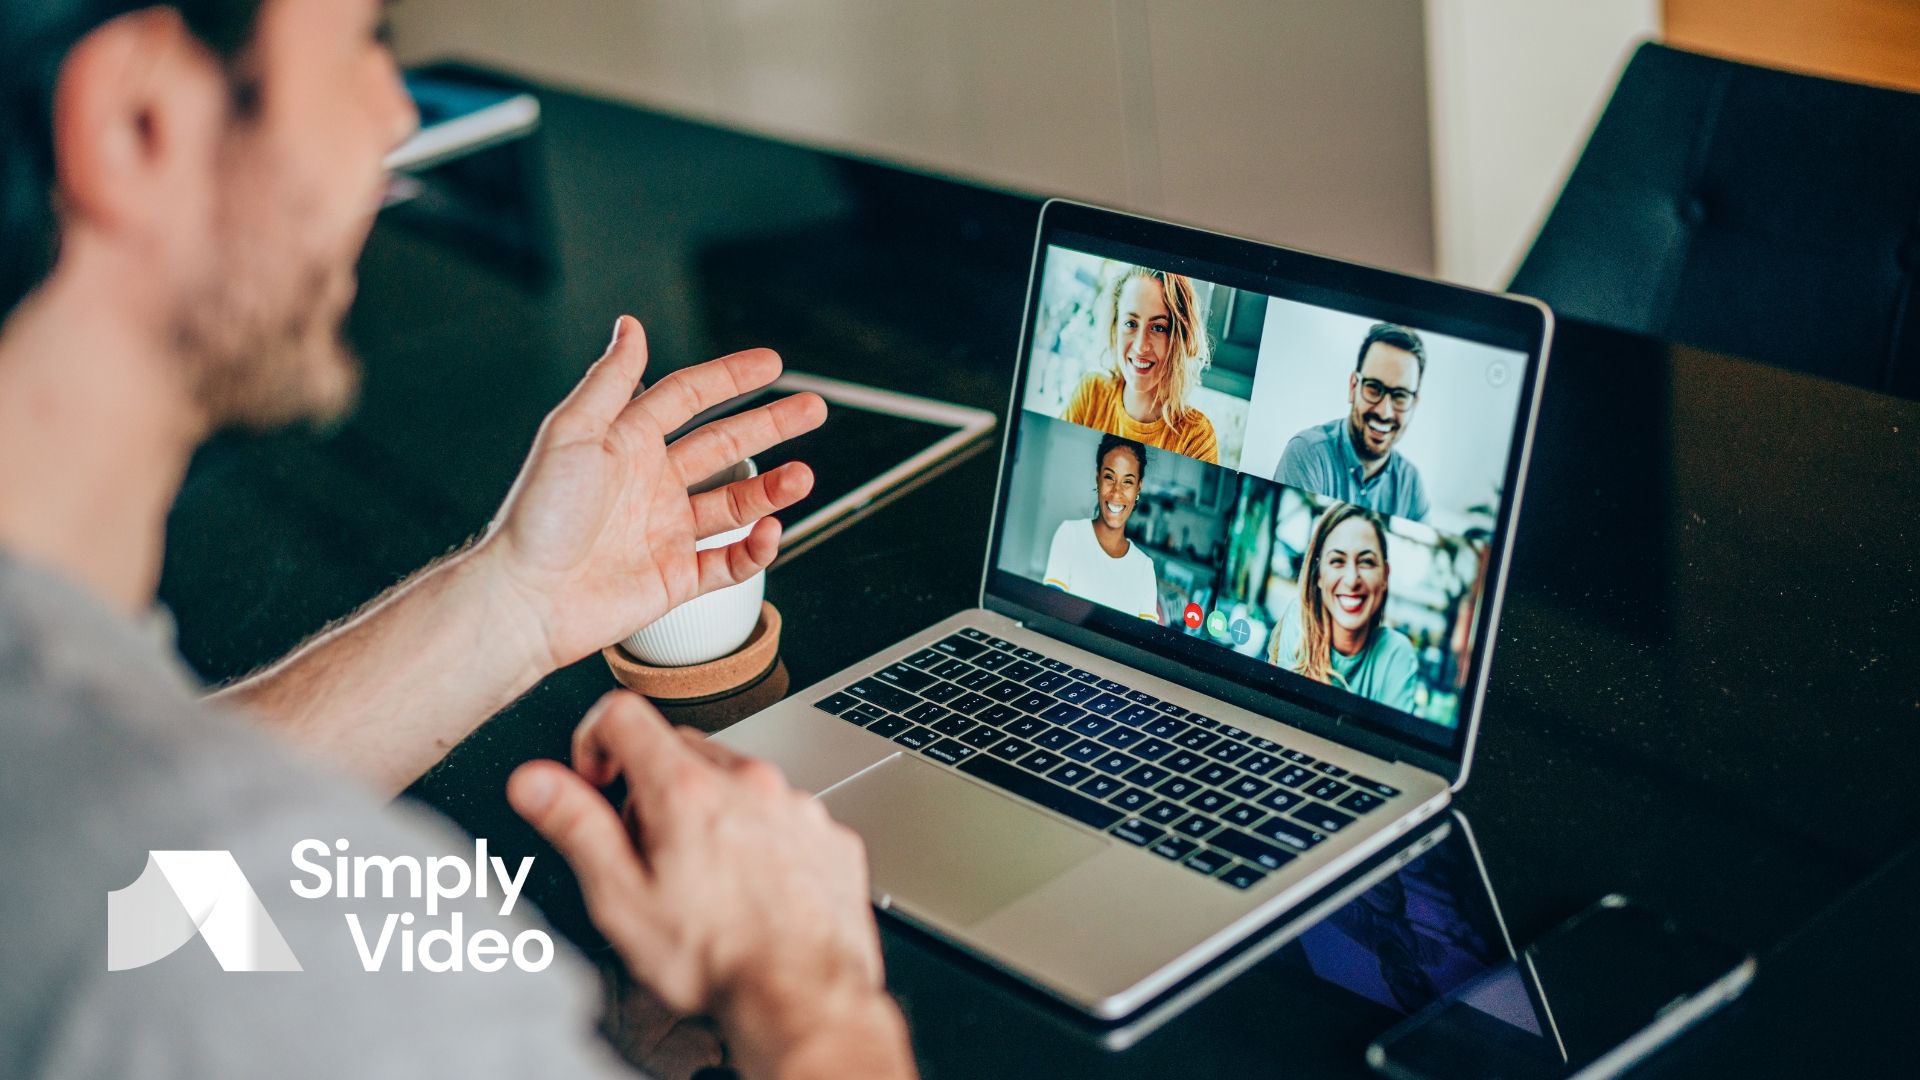 Pexip and SimplyVideo are both impressive enterprise video platforms. But which is best for XR devices? And do you even have to choose between them?